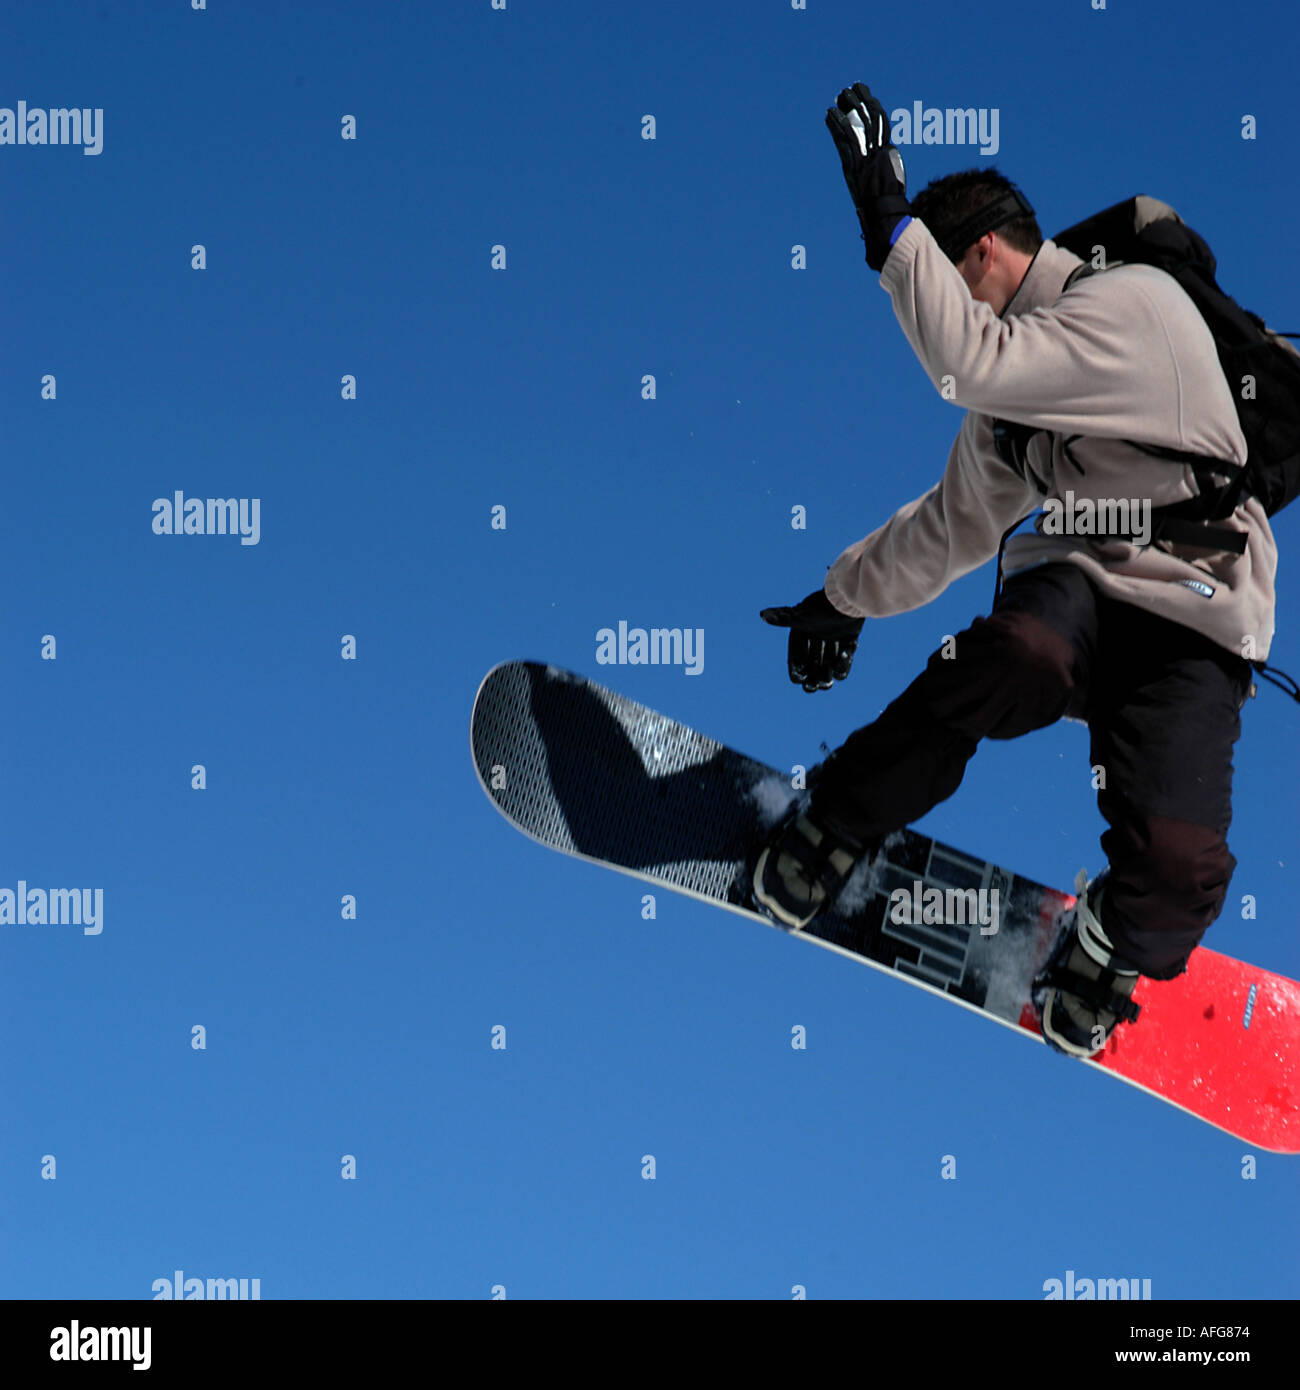 Snowboarder jumping Stock Photo